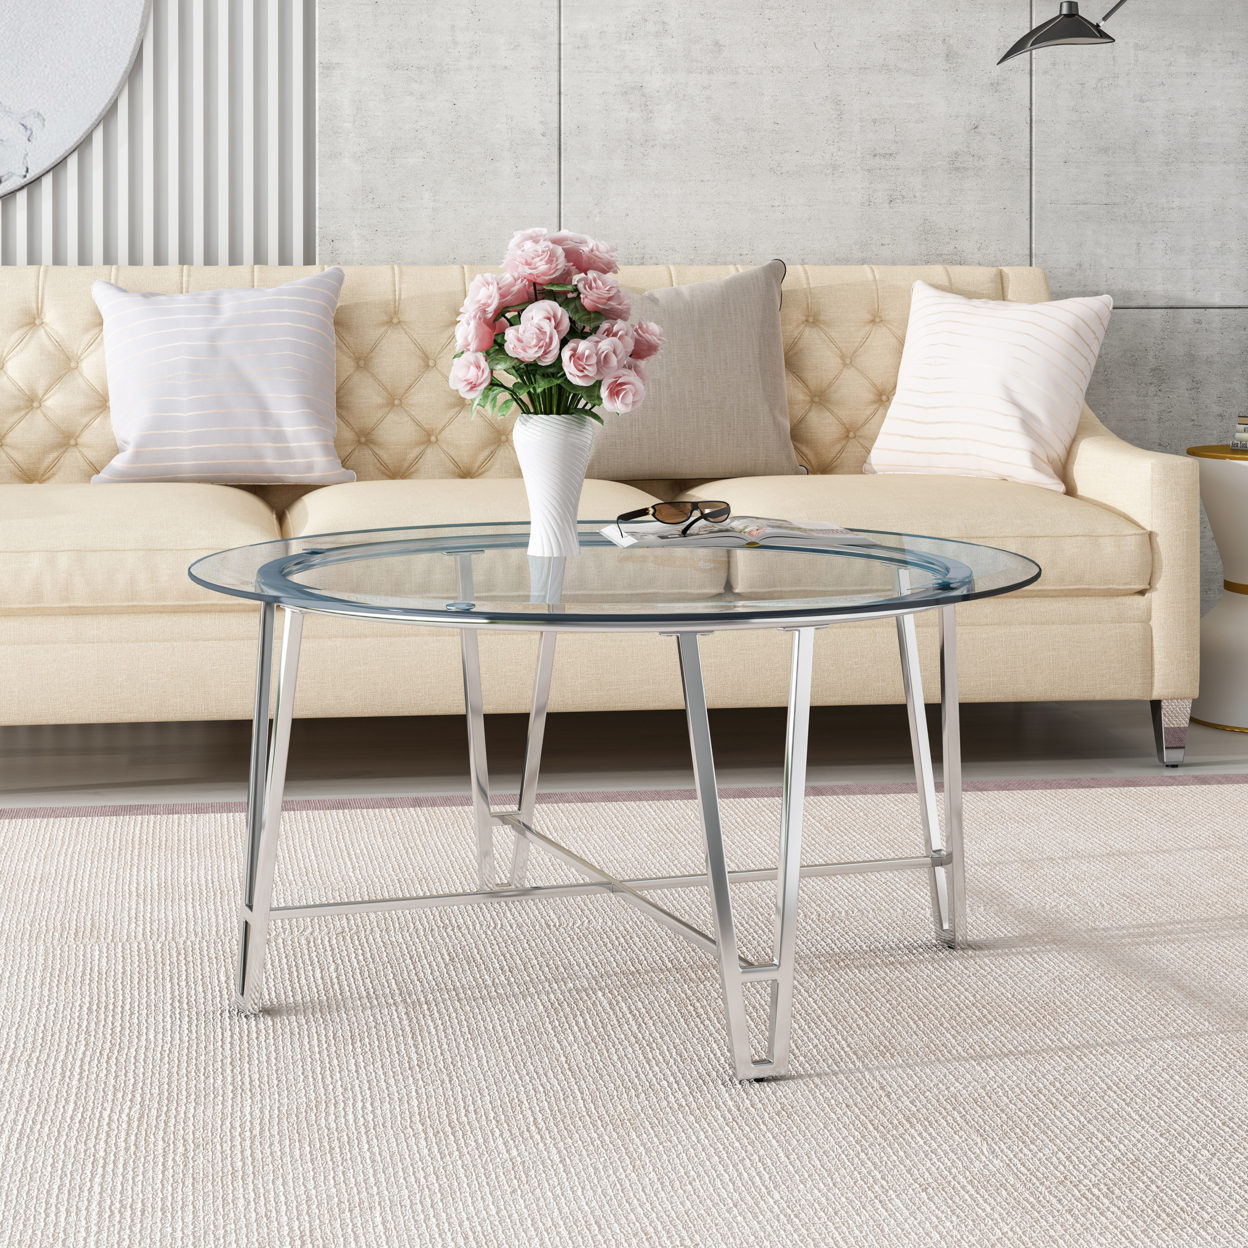 Phoebe Modern Iron Coffee Table With Round Tempered Glass Top